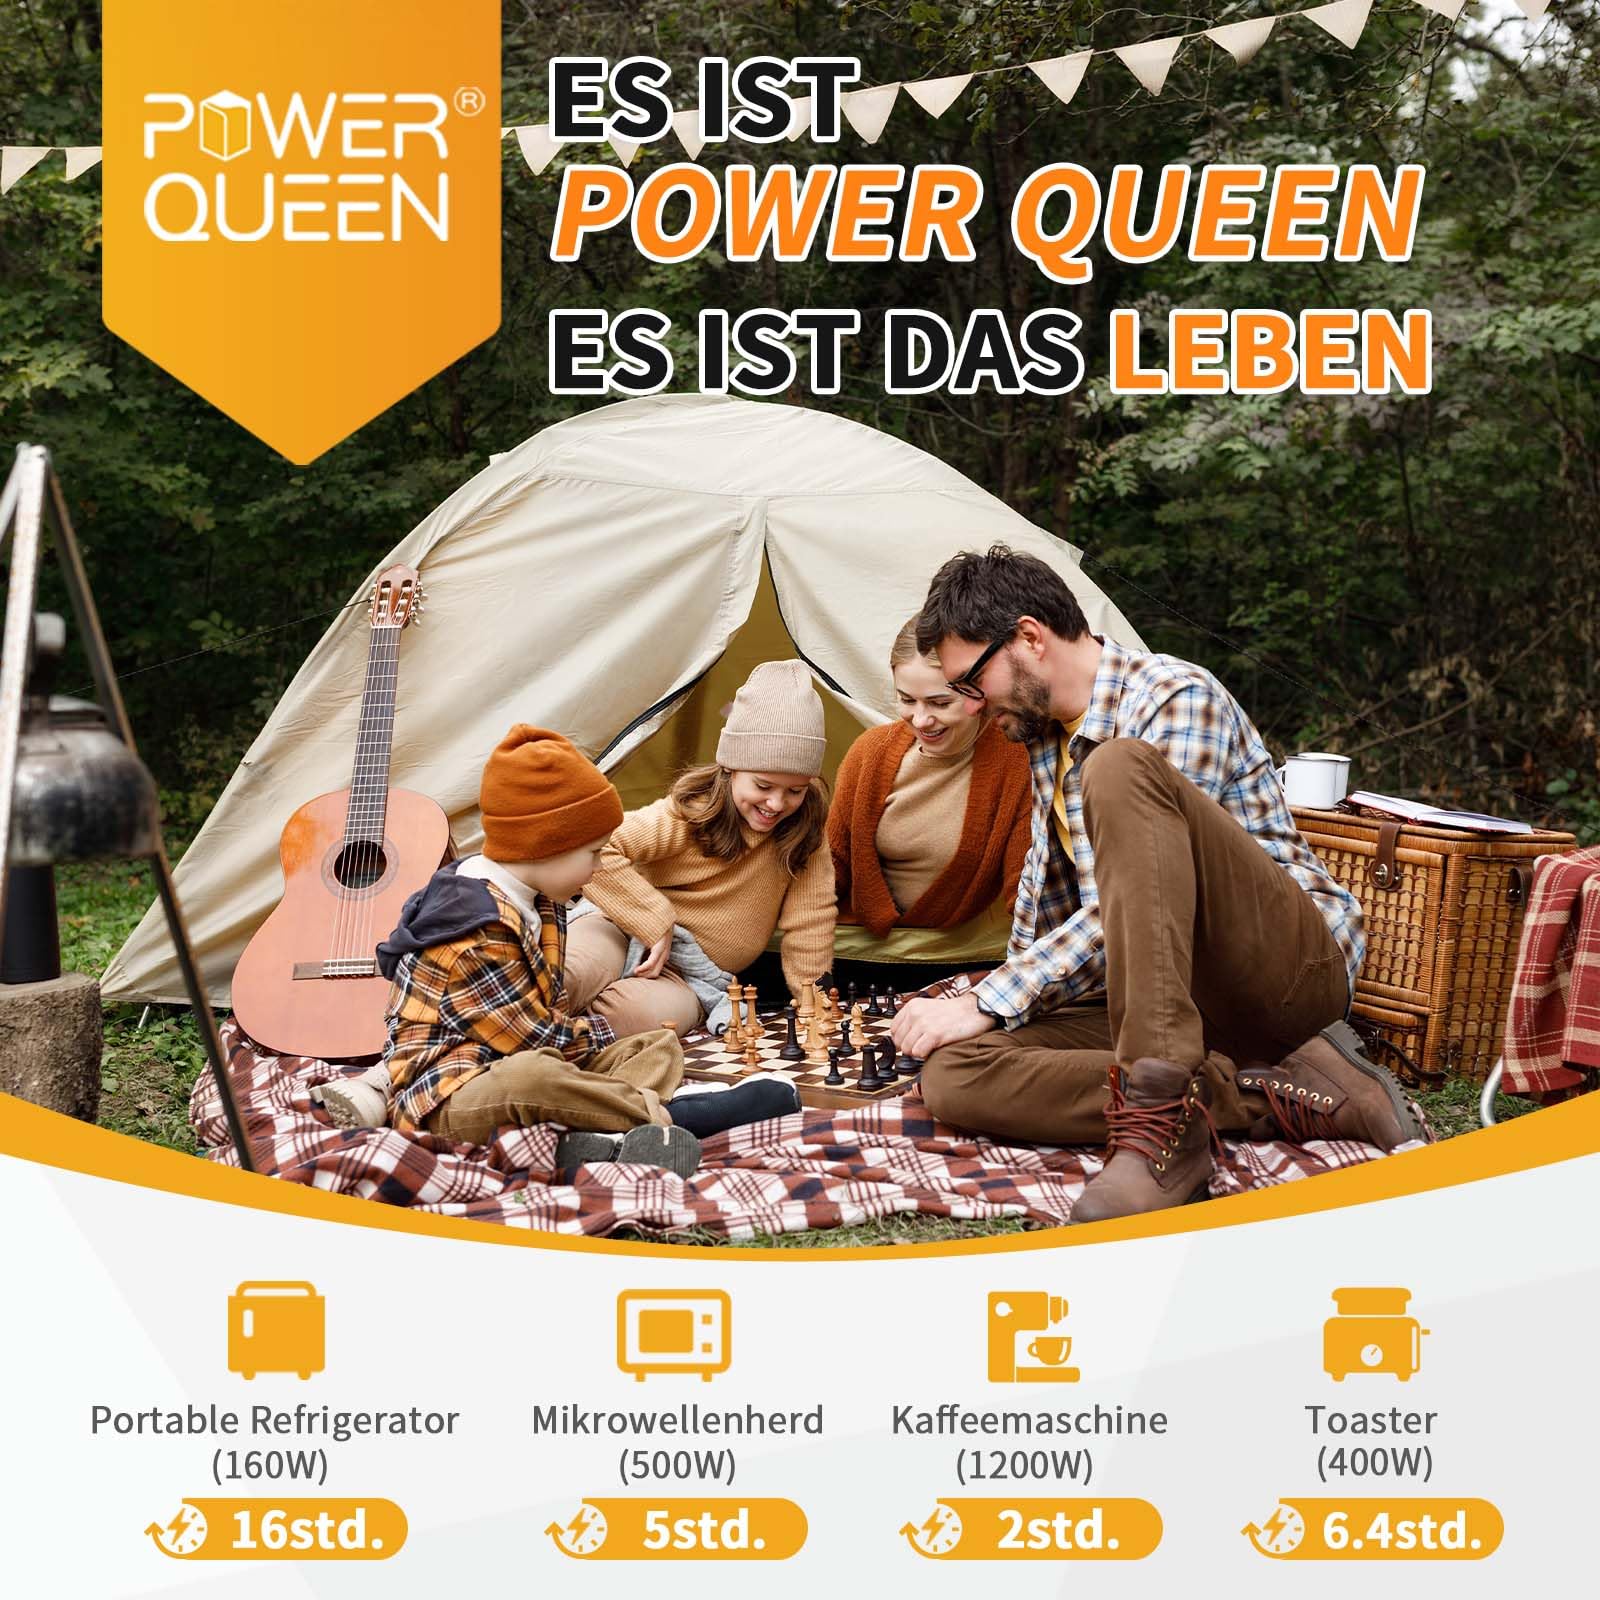 Power Queen 12.8V 200Ah Plus LiFePO4 Battery, Built-in 200A BMS